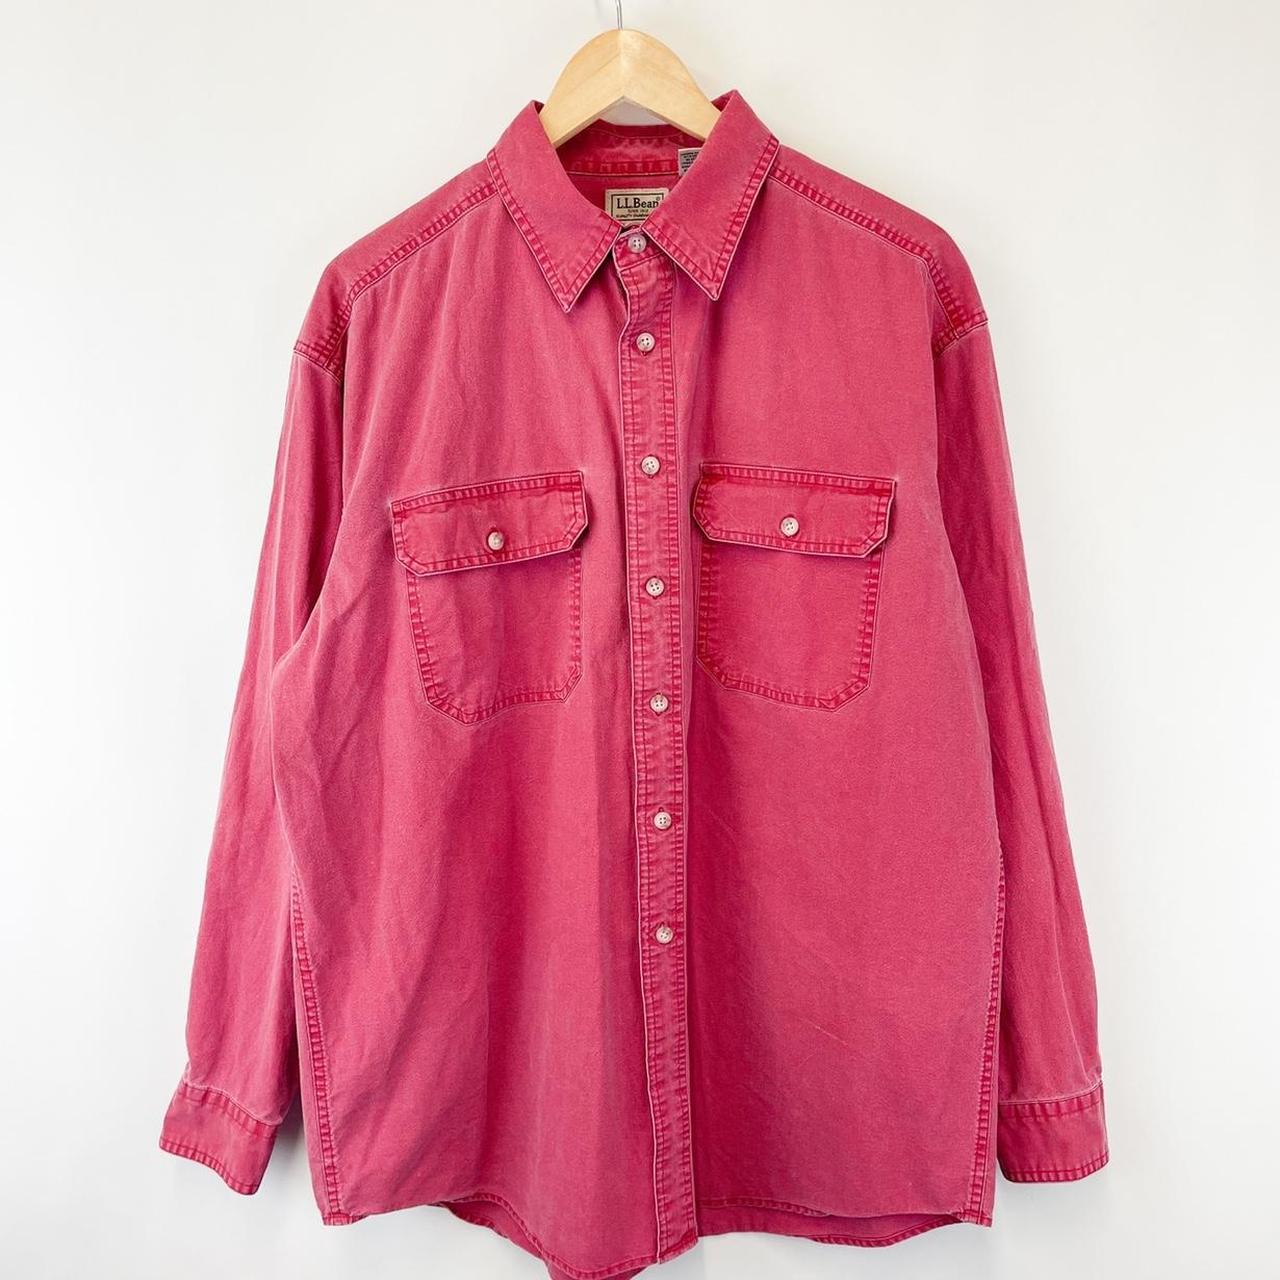 L.L.Bean Men's Red and Pink Shirt